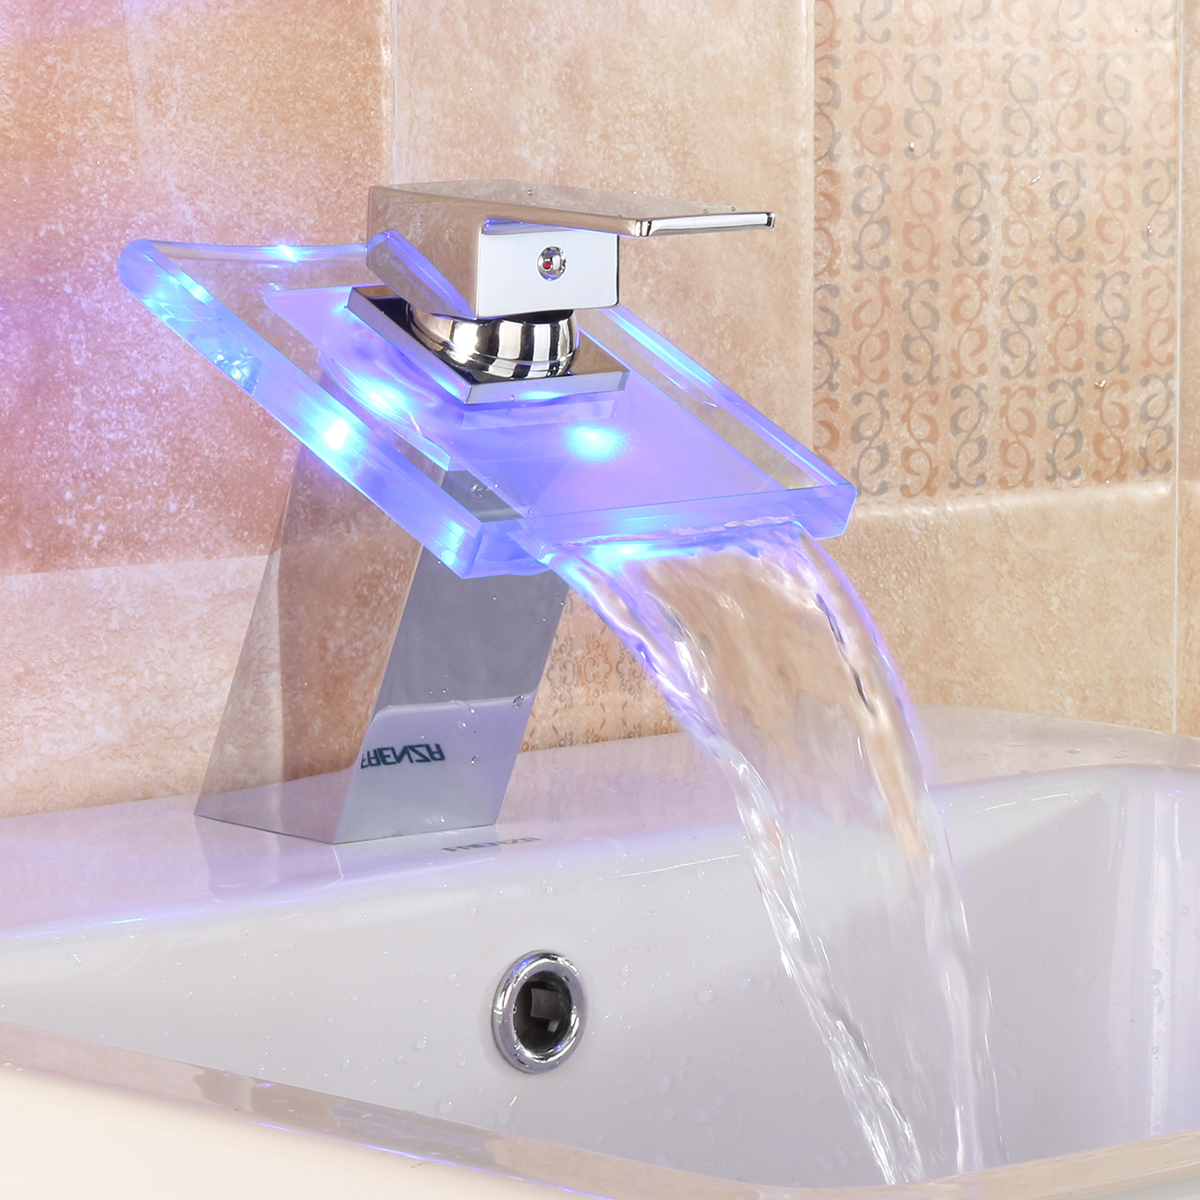 

LED Color Changing Waterfall Faucet Bathroom Sink Faucet Glass Basin Bathtub Mixer Tap